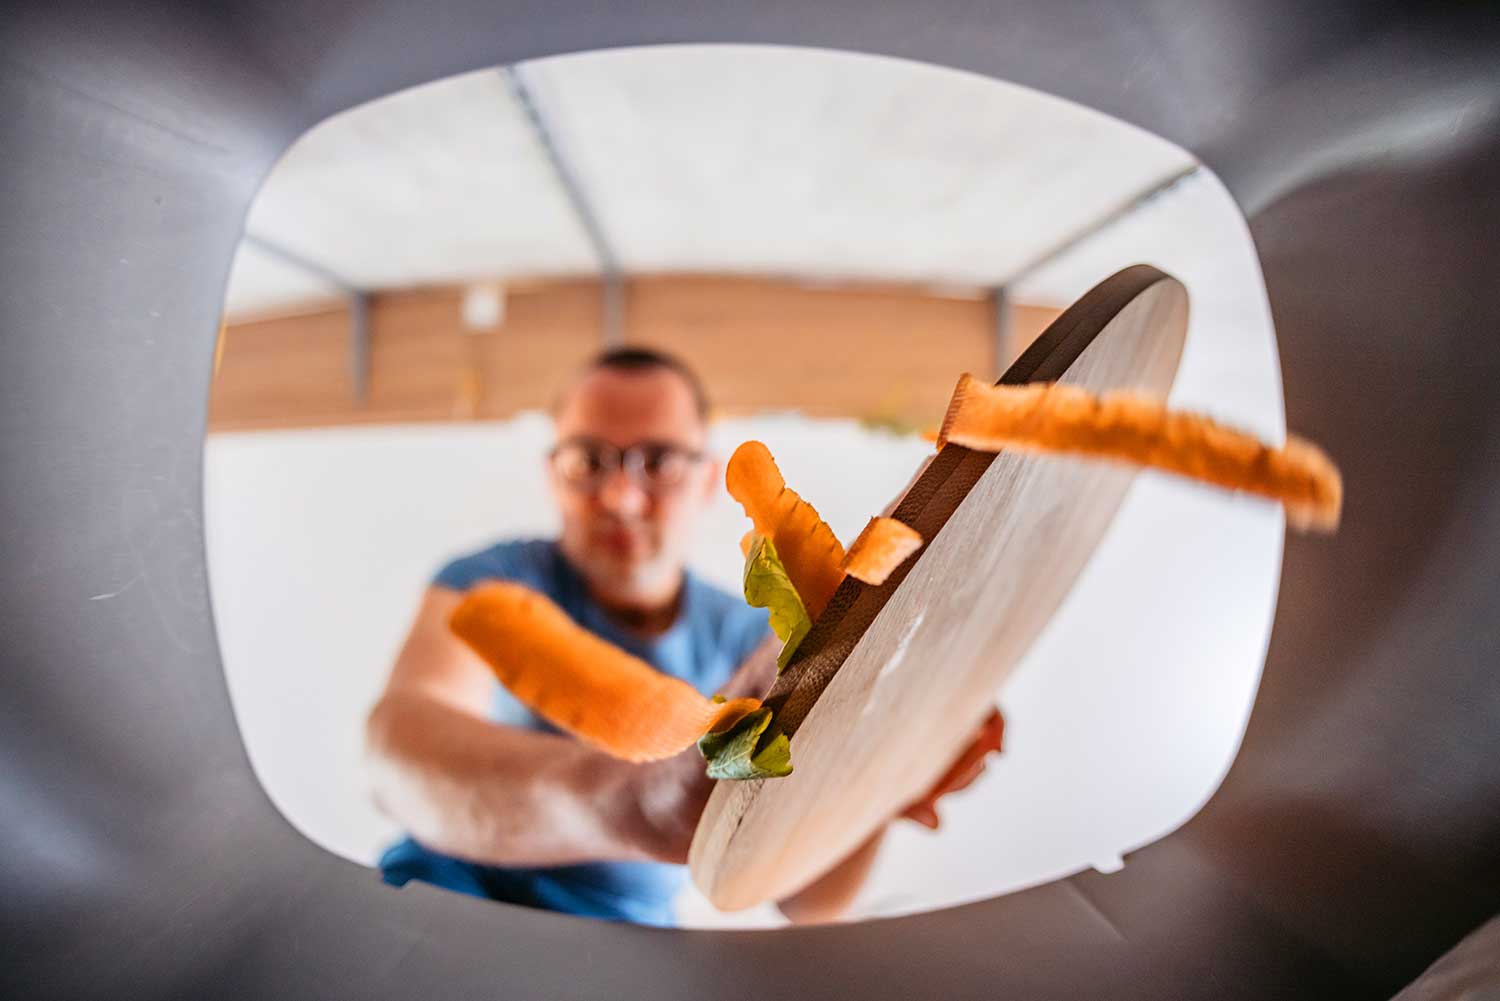 A man scrapes carrots and lettuce from a cutting board to a container as seen from inside the container.